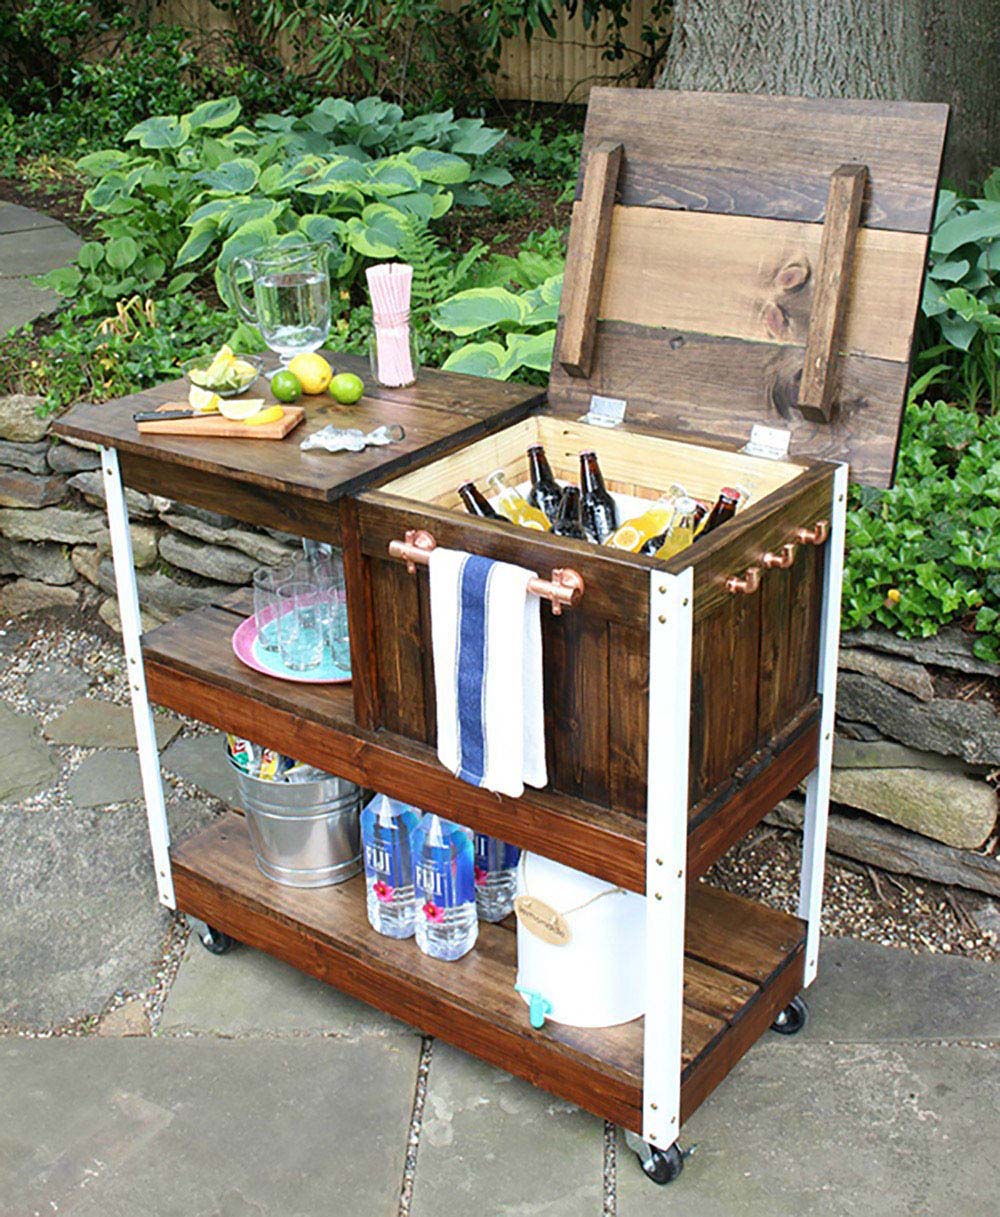 A DIY grill cart with a cooler holder and cutting board area.